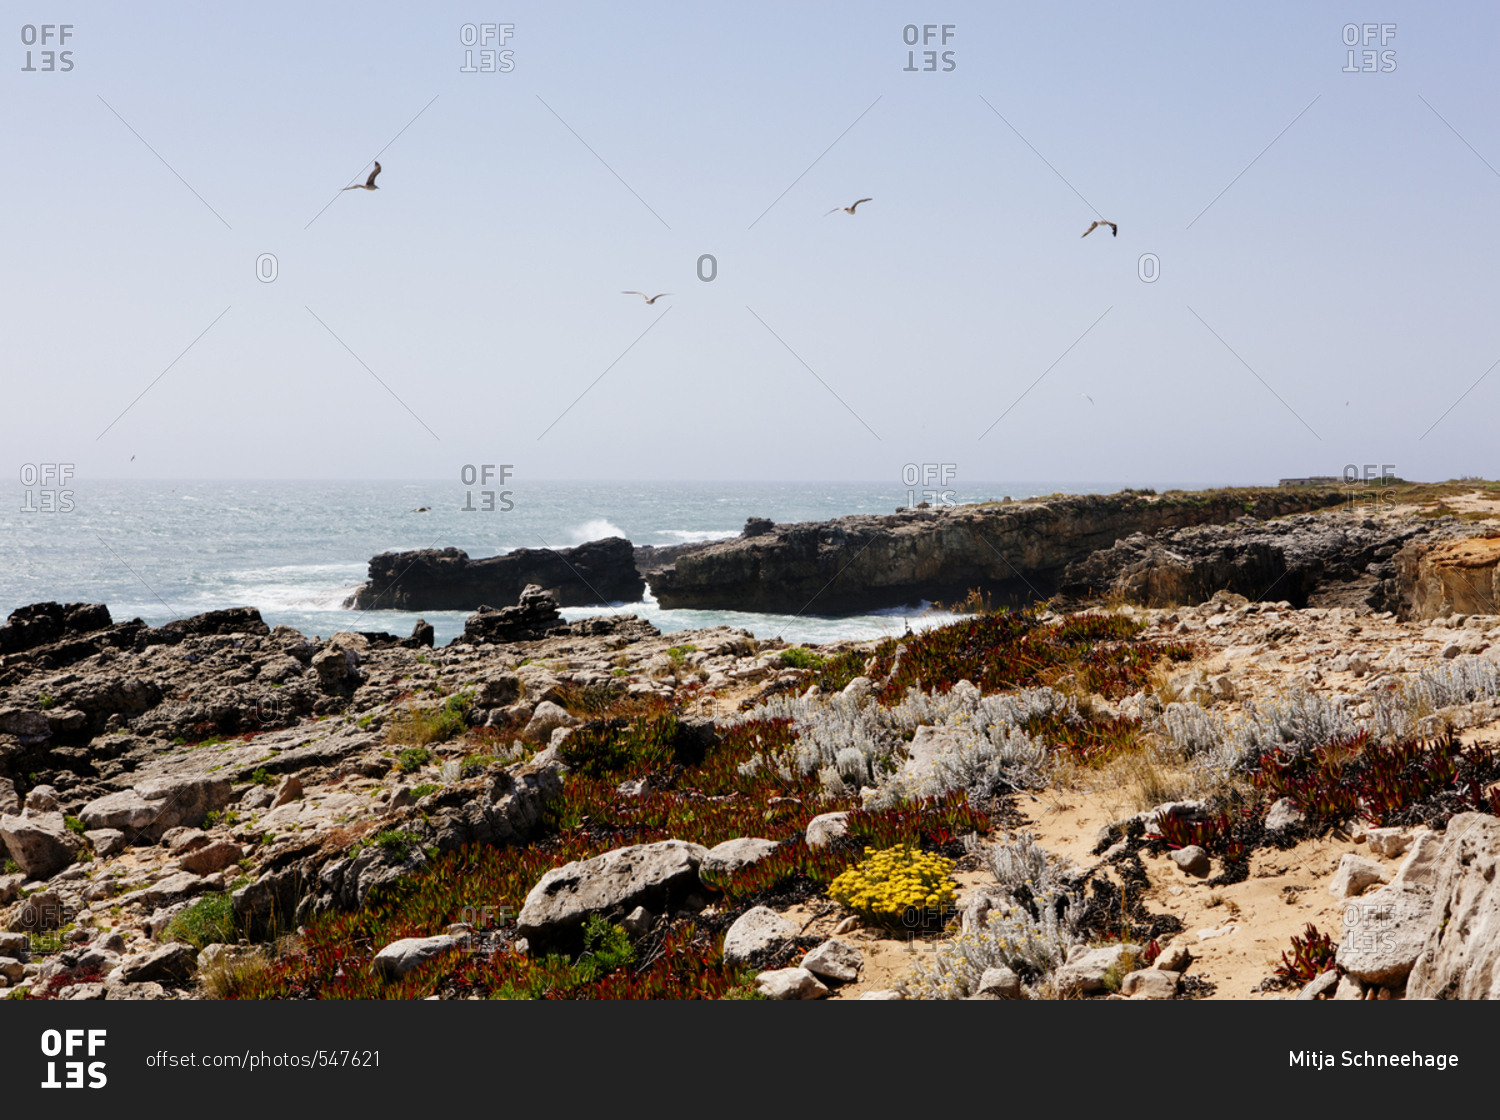 Birds flying over rocky coast in Portugal